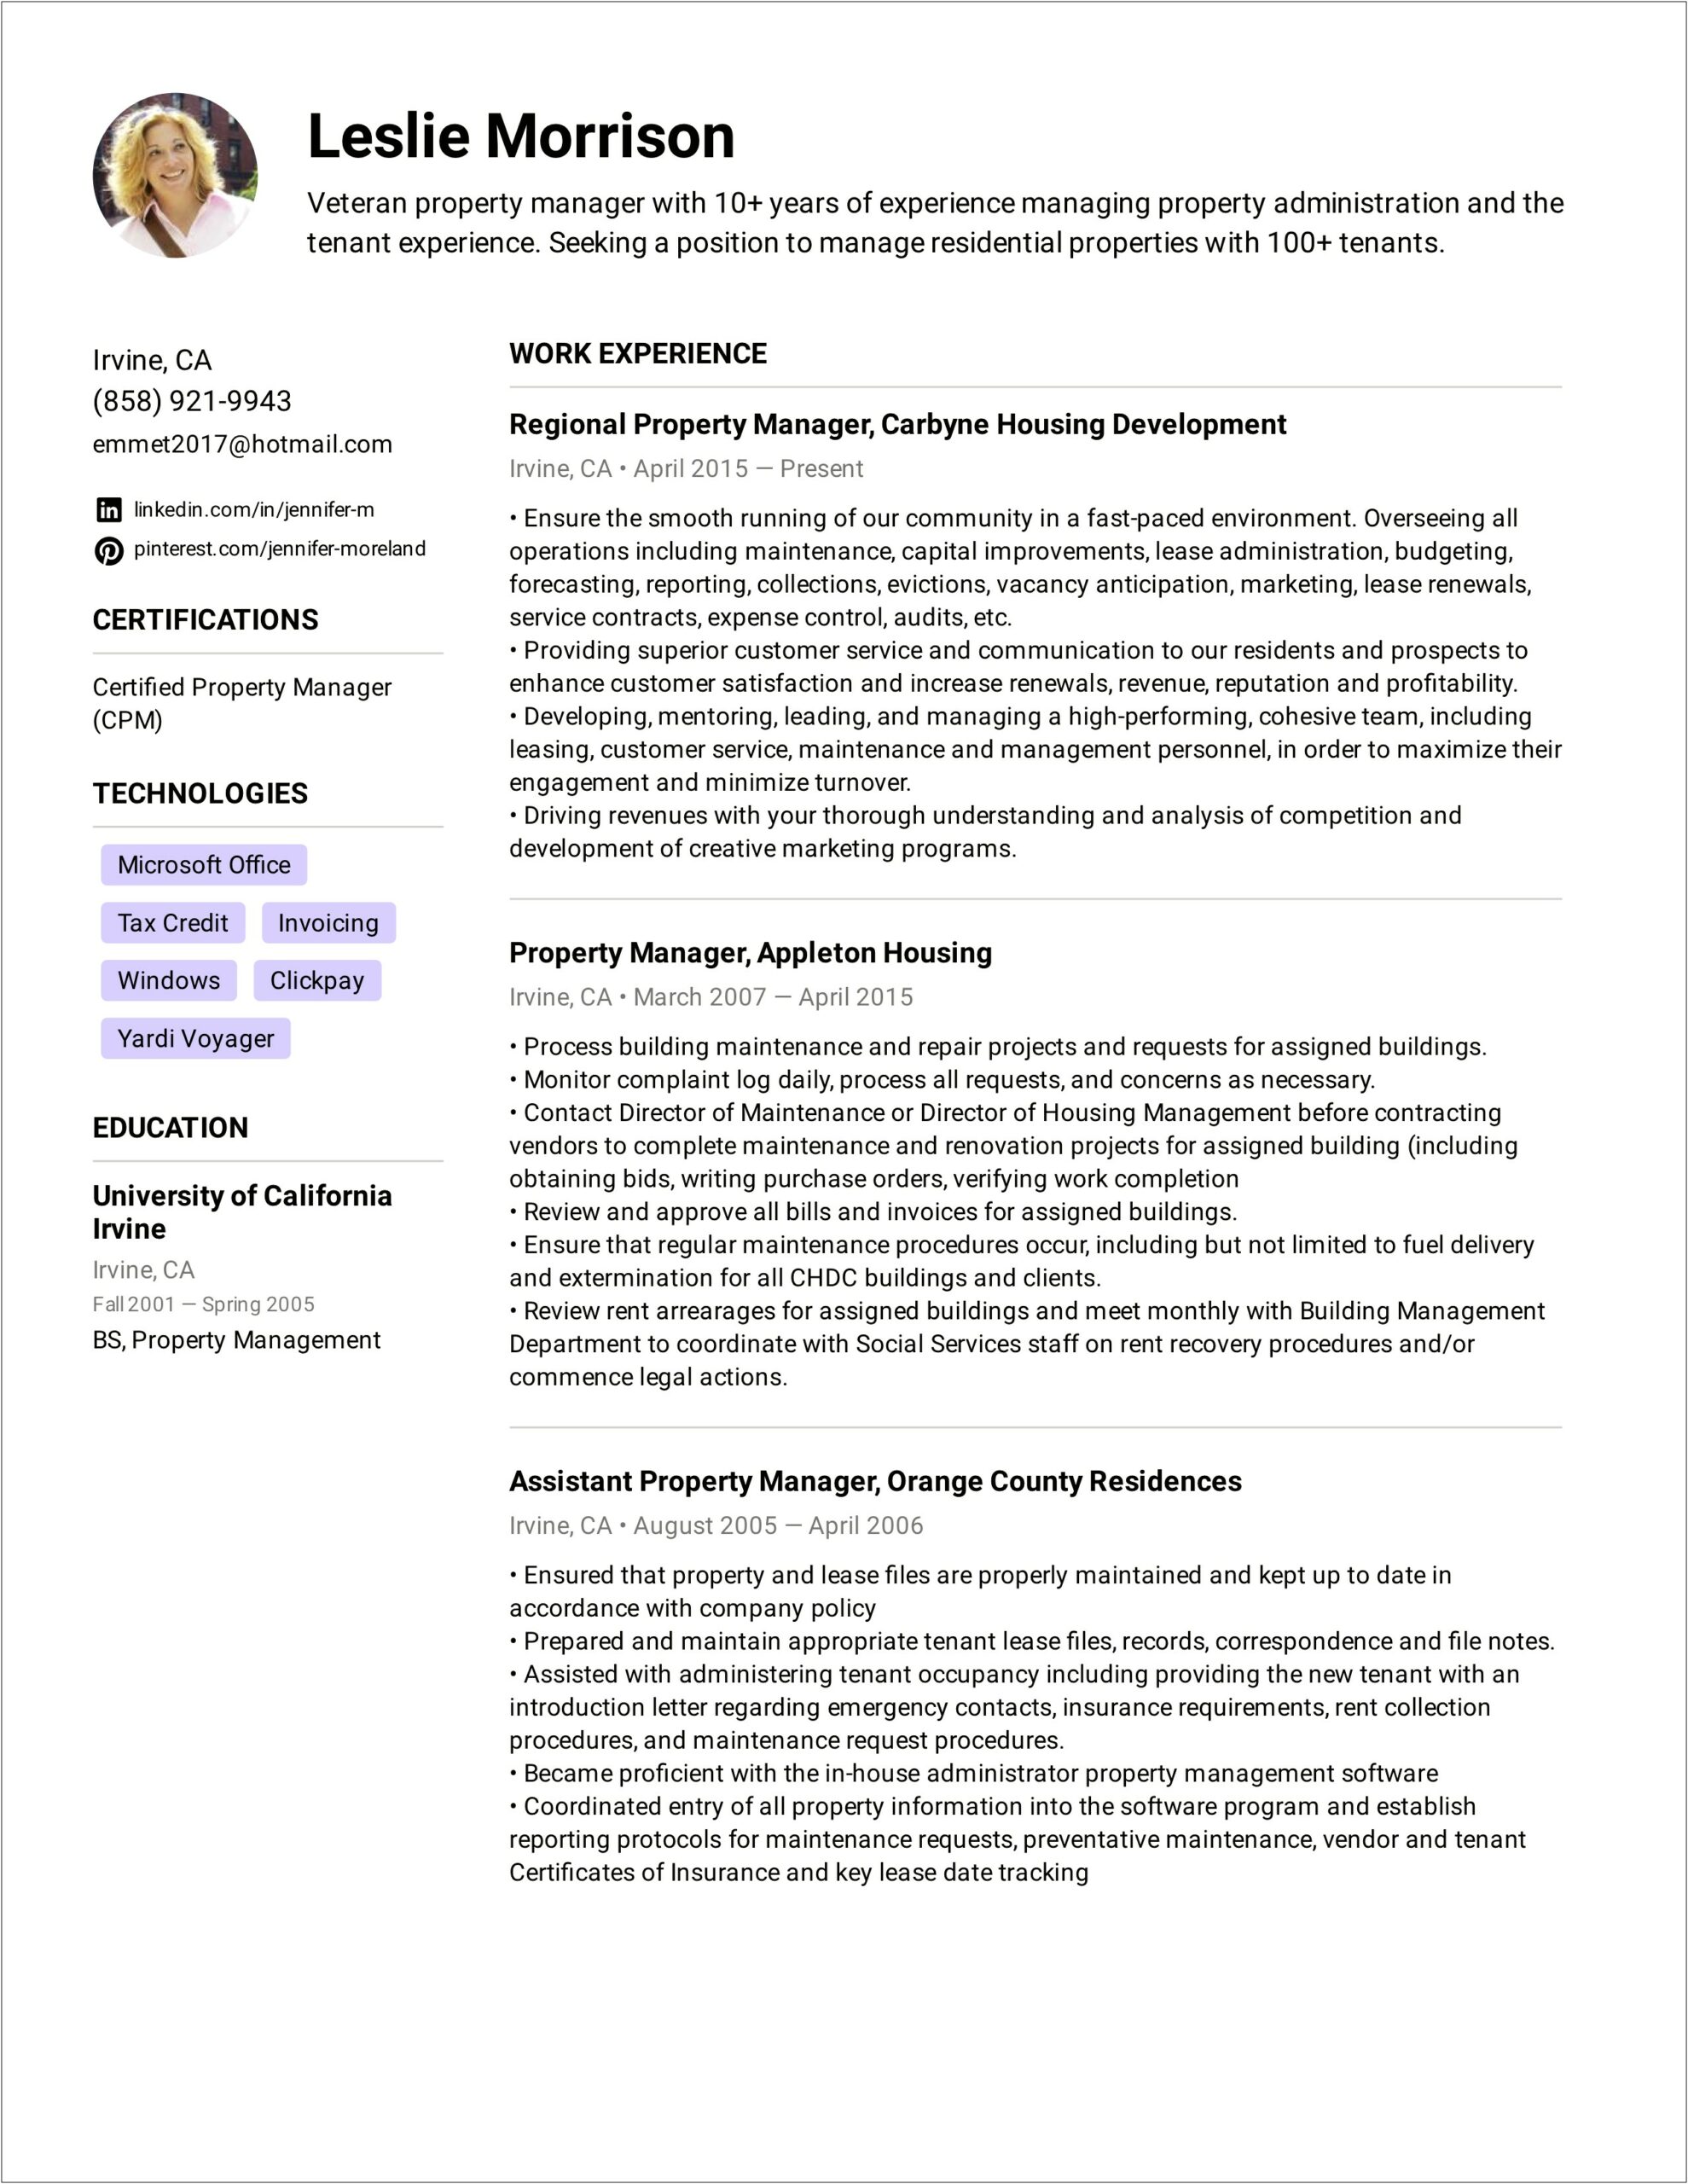 Interior Fit Out Project Manager Resume